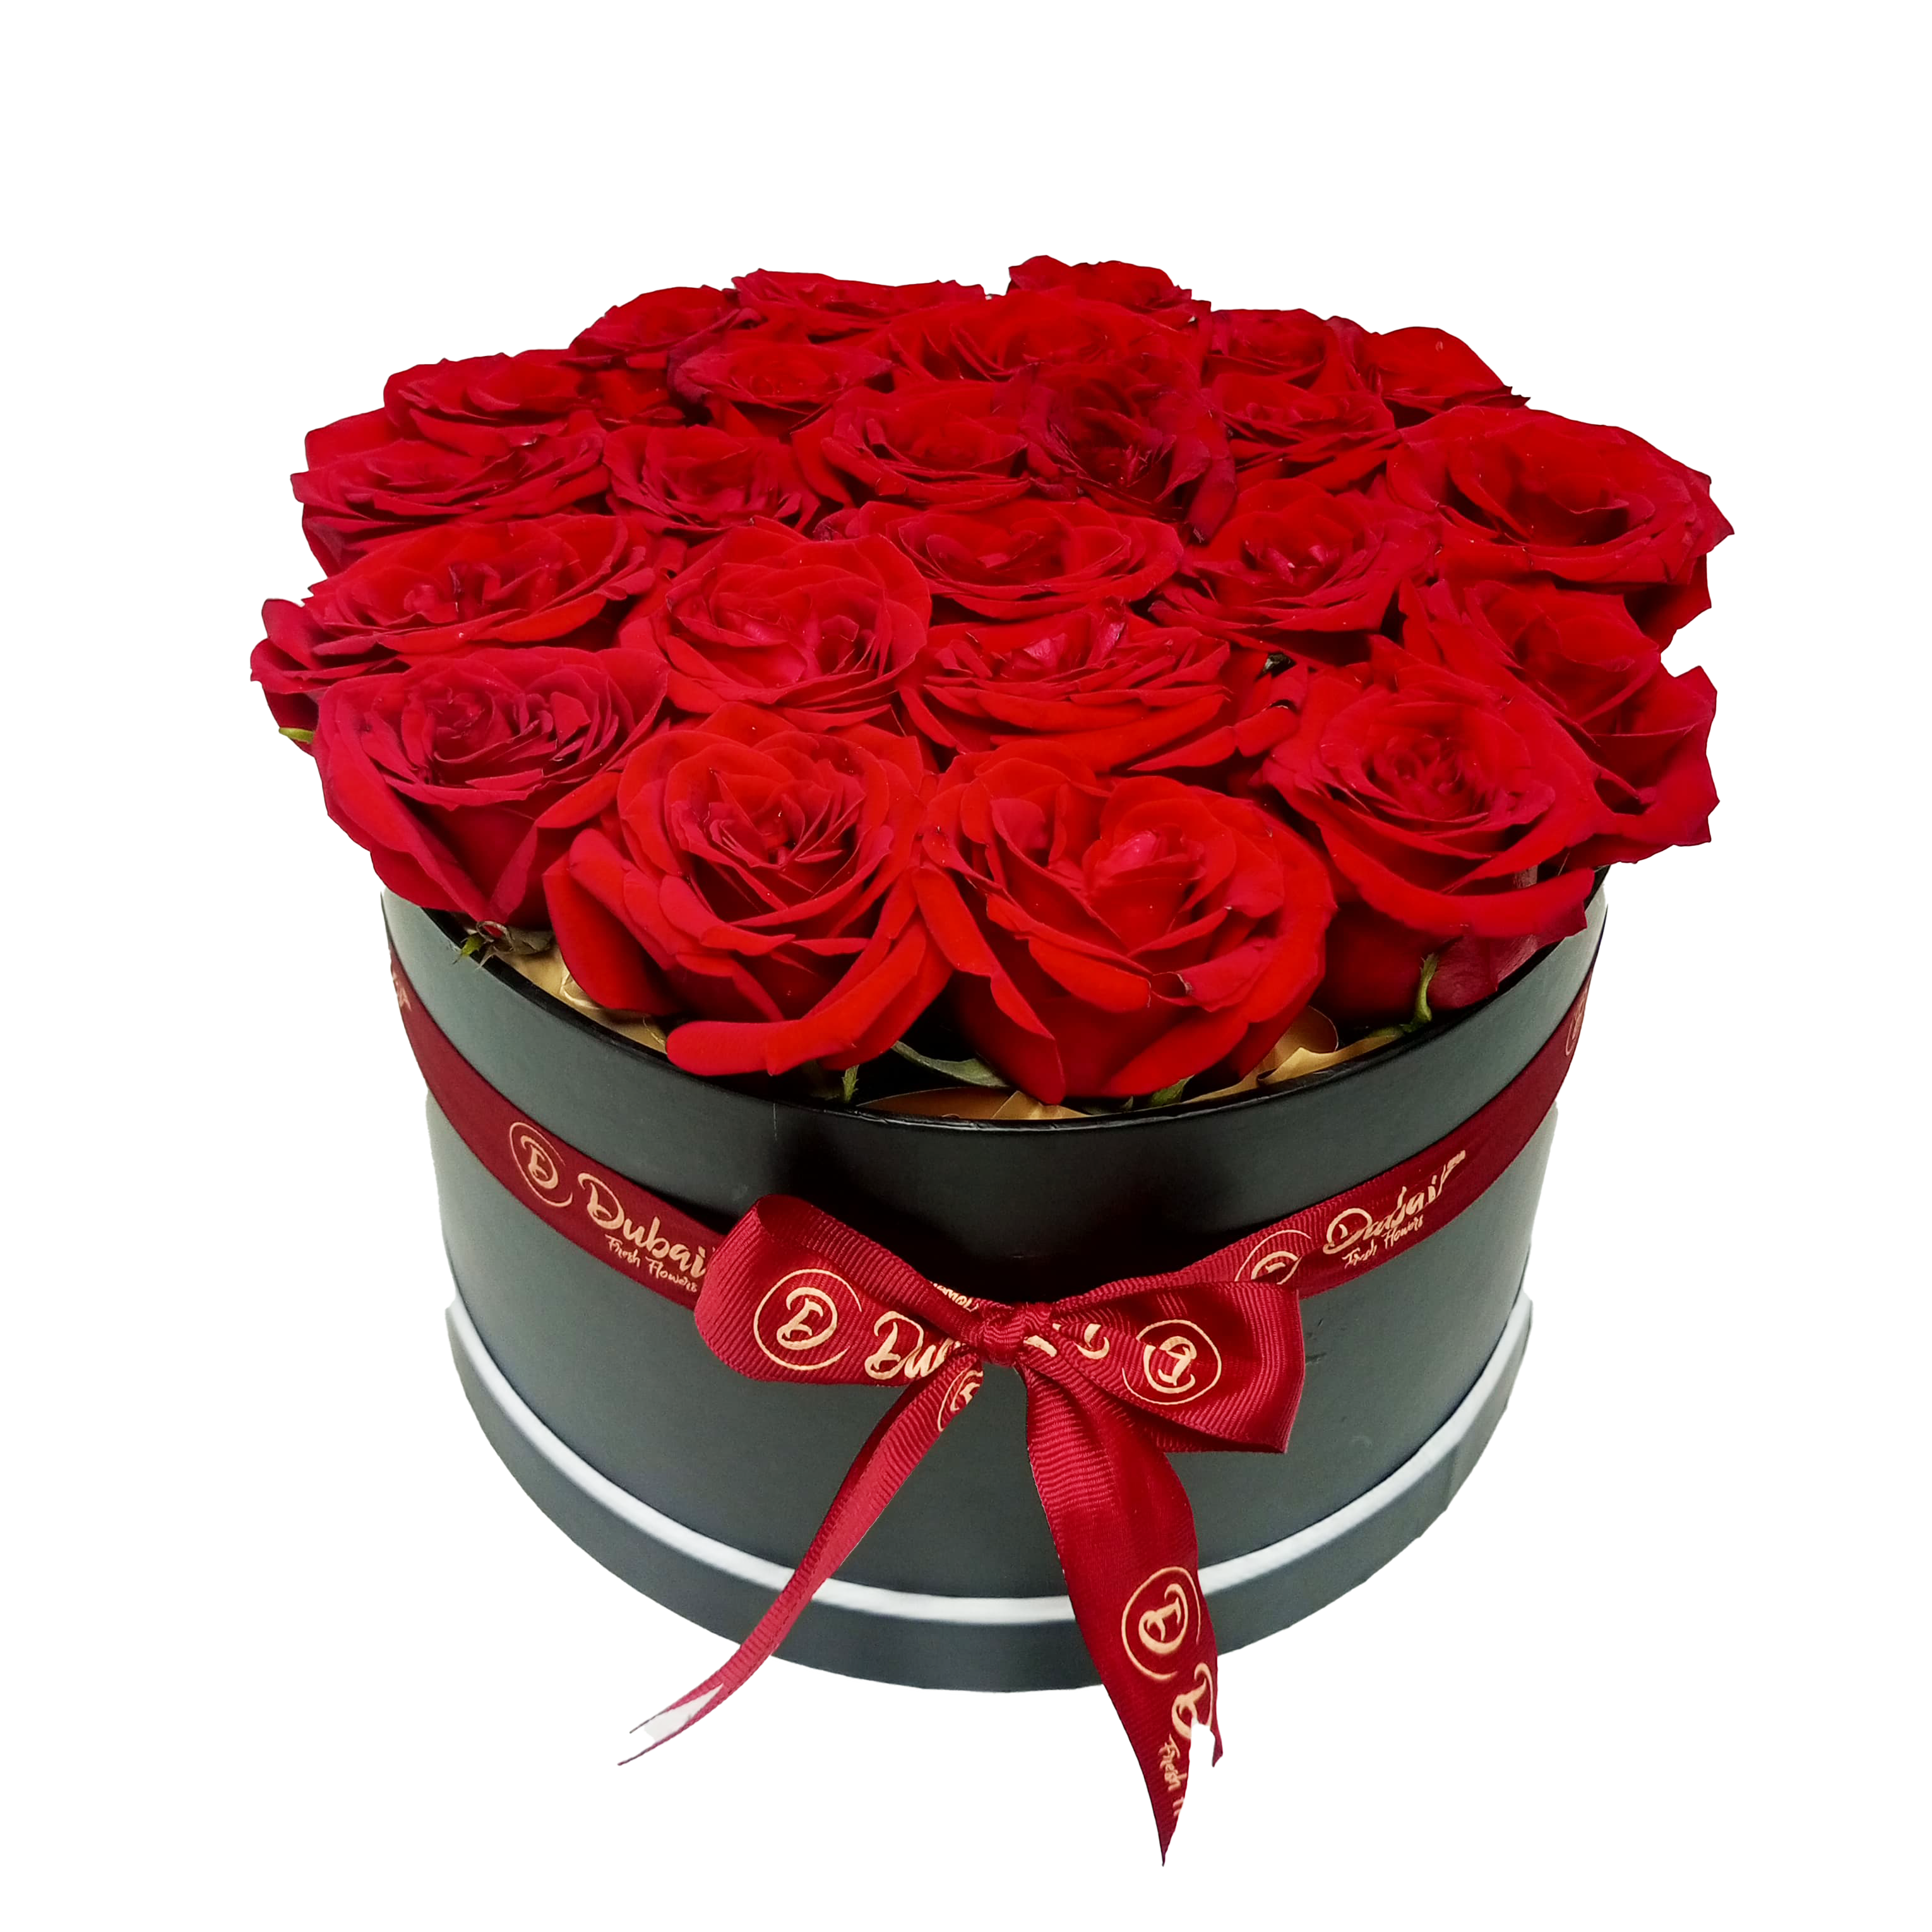 25 Red Roses in Box